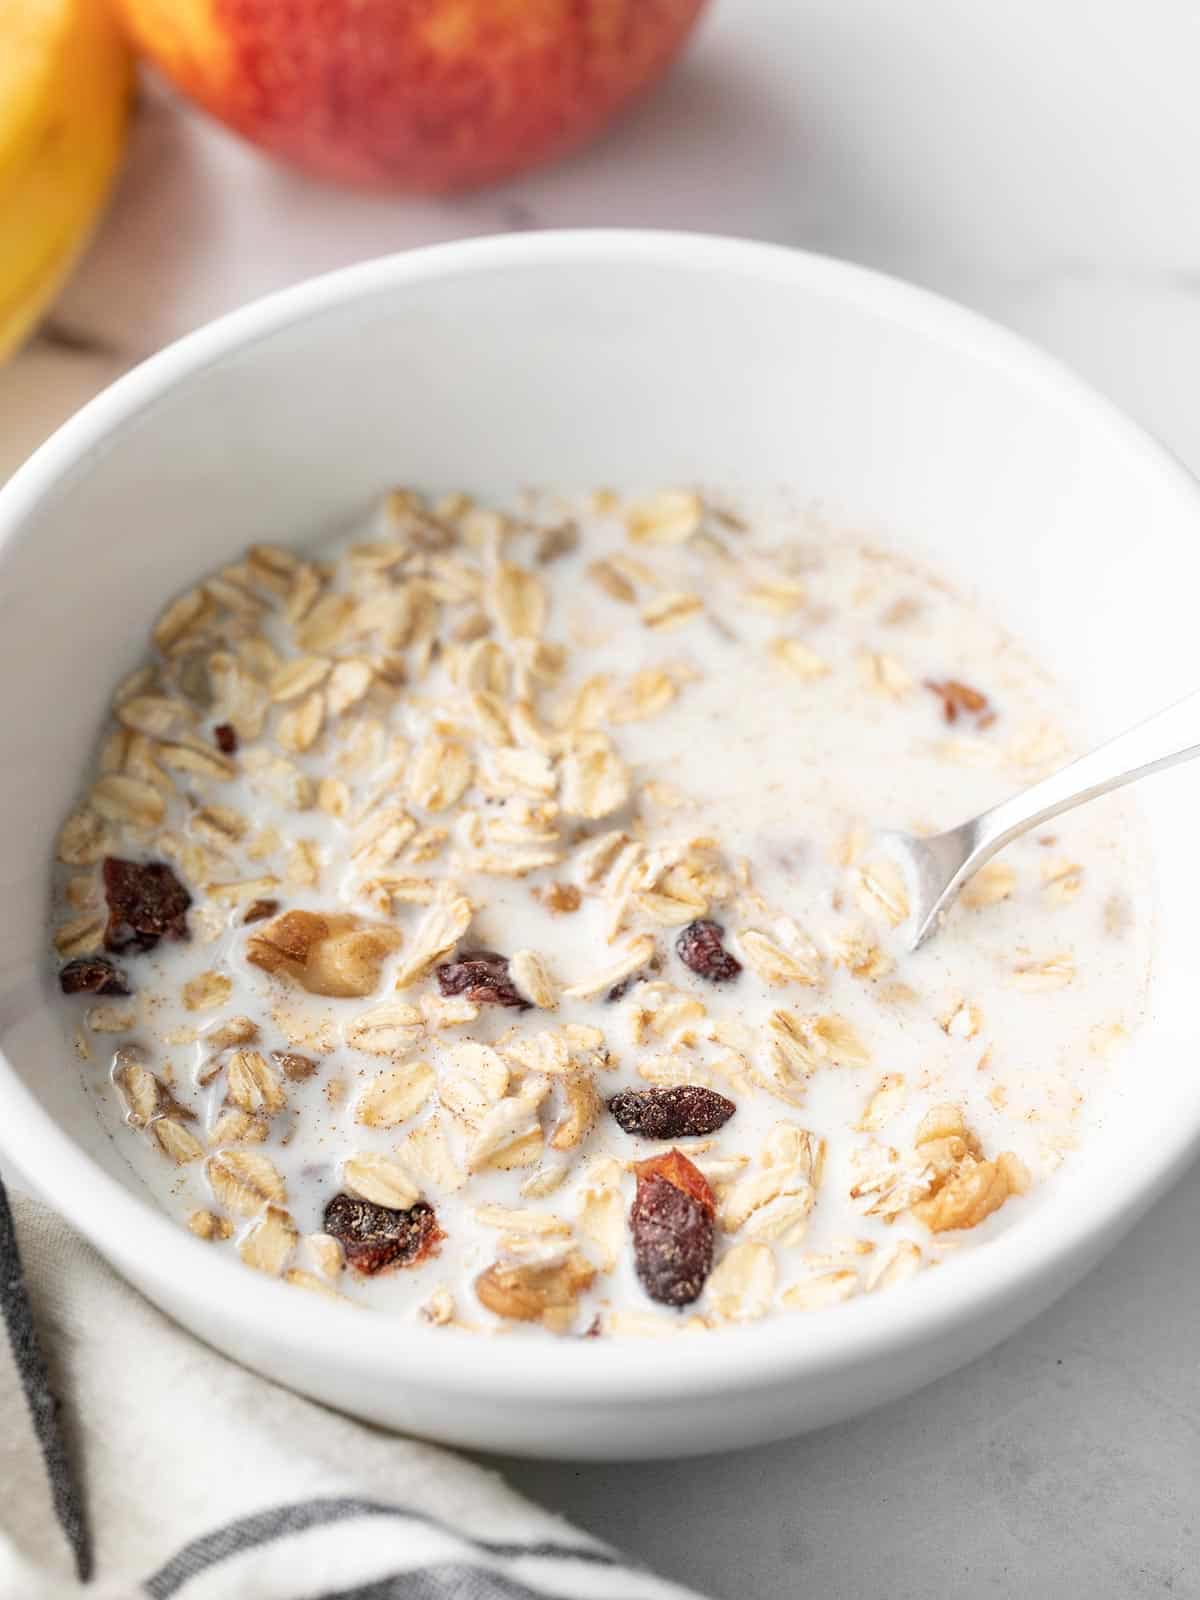 Close up side view of a bowl of muesli.